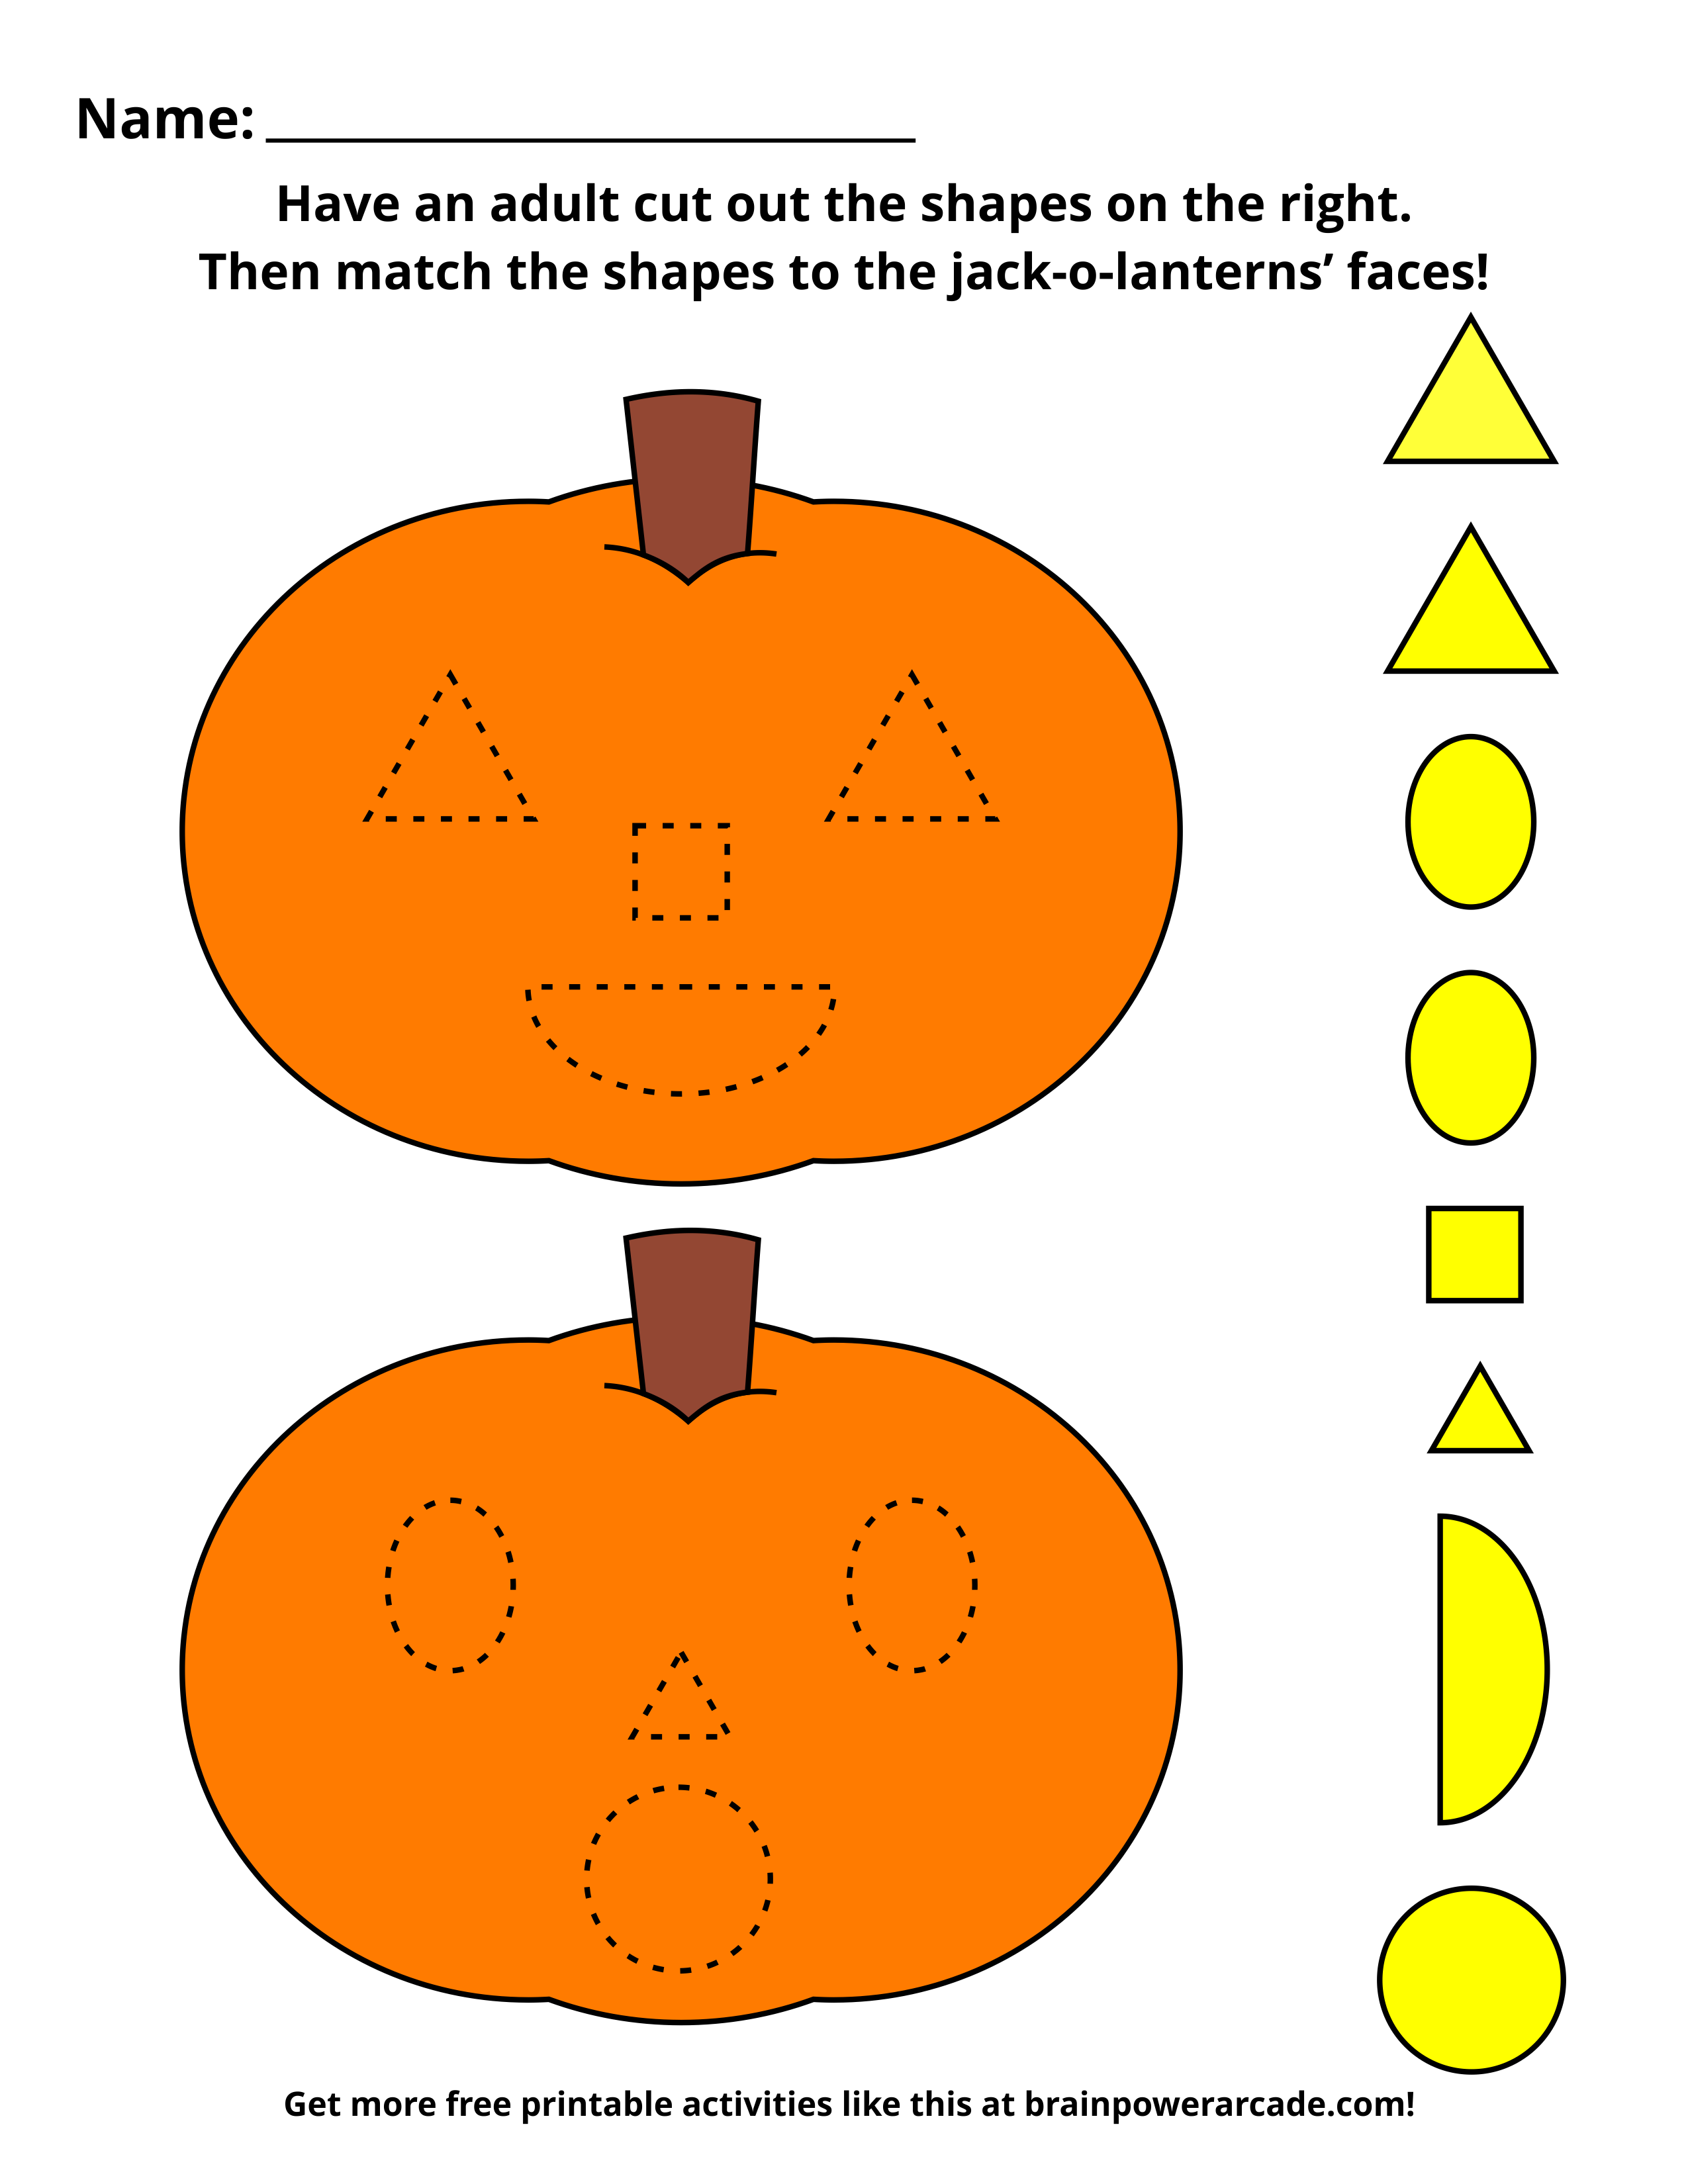 Match the Shapes to the Jack-o-Lanterns